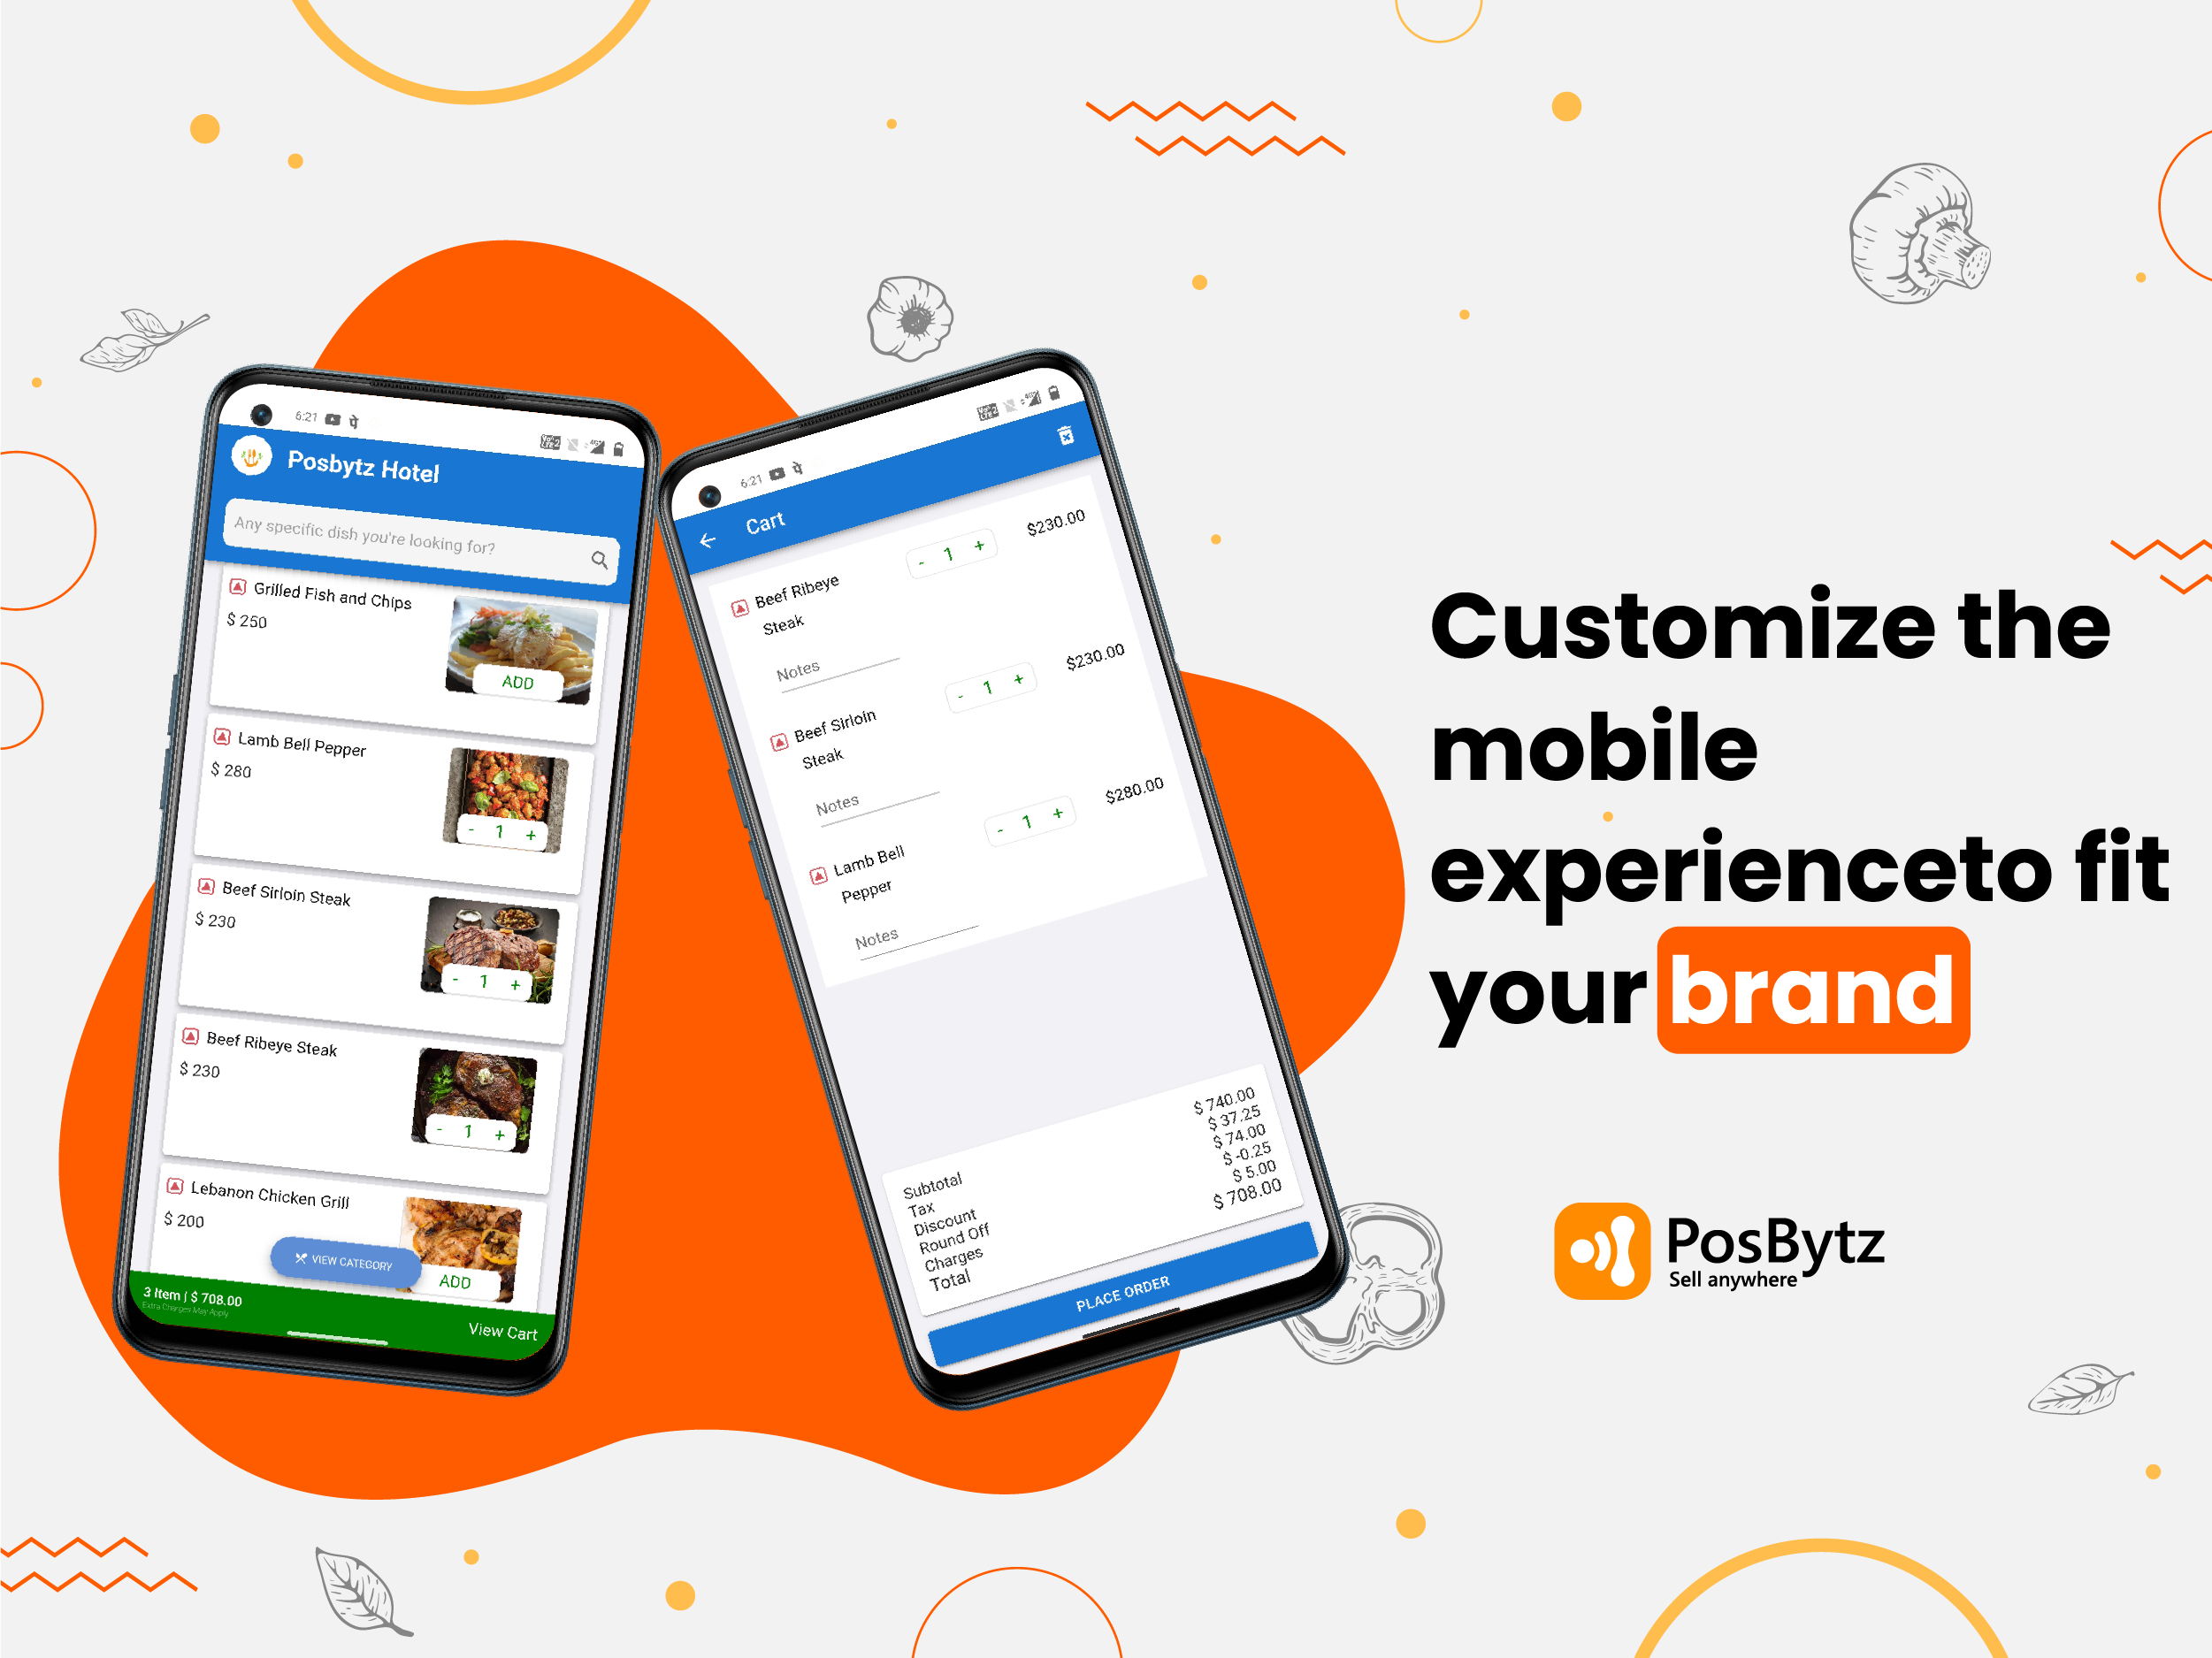 Customize the mobile experience to fit your brand